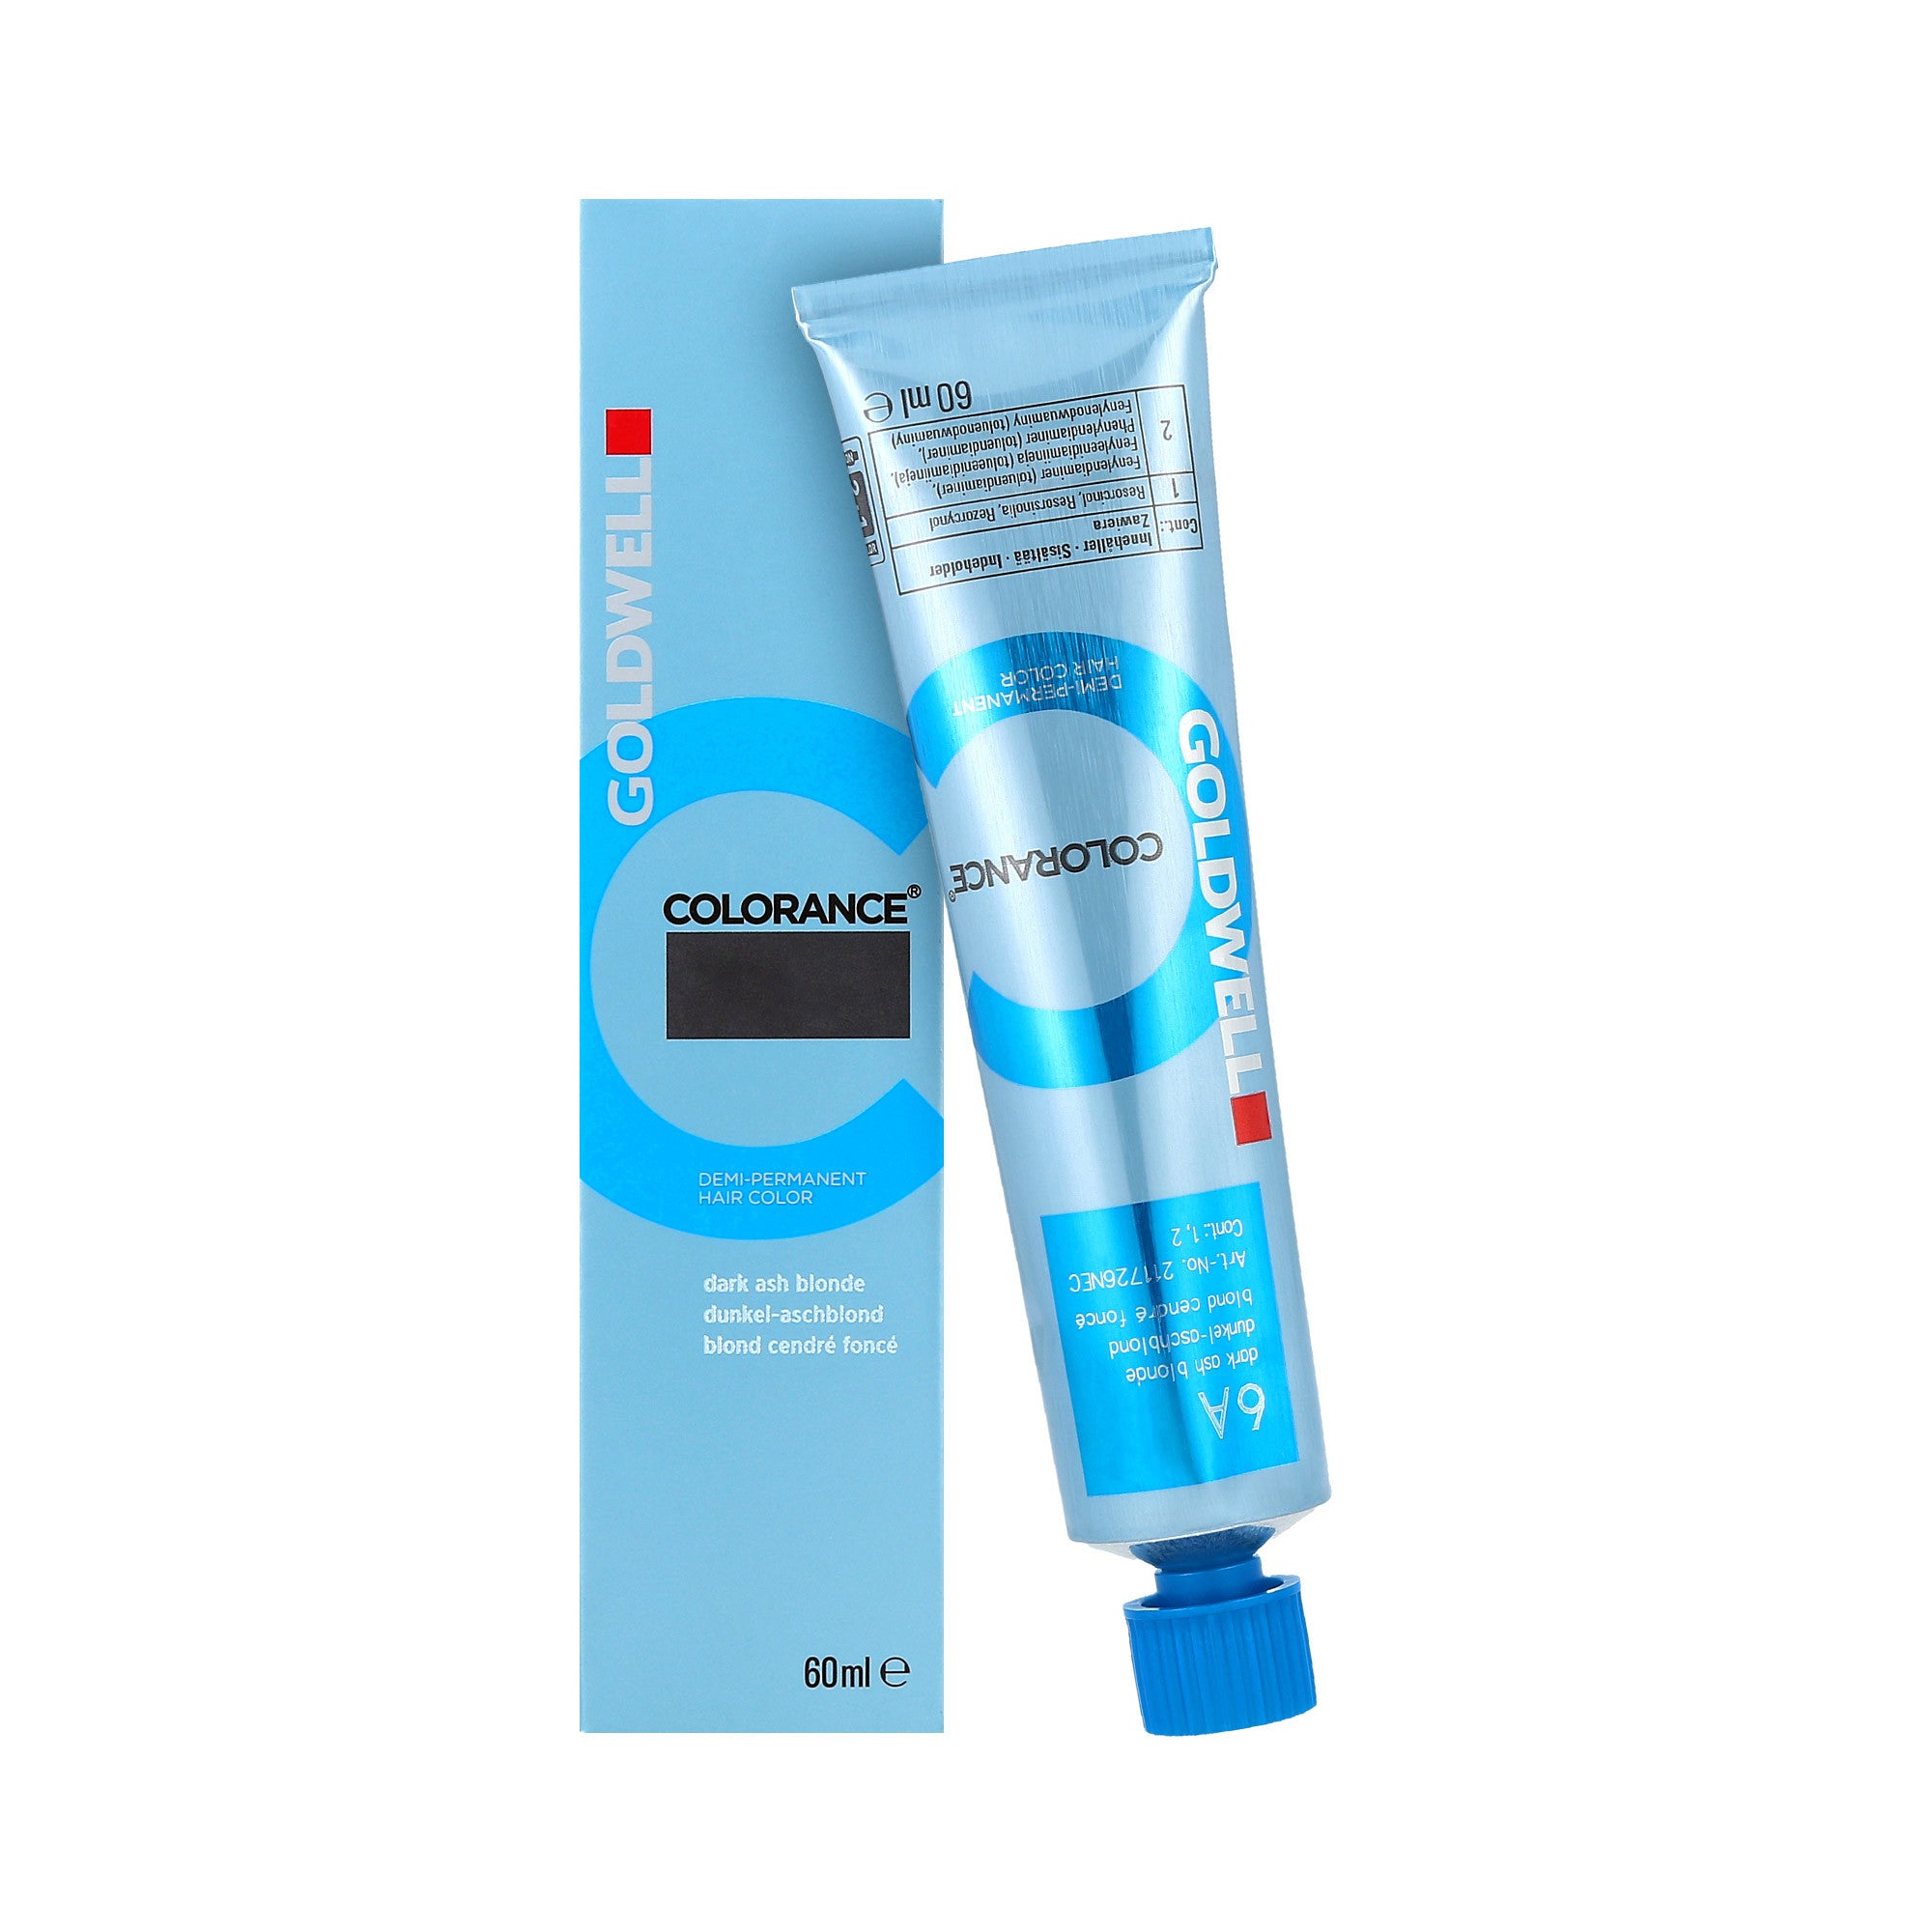 Goldwell Colorance Tube (60ml) - Ultimate Hair and Beauty